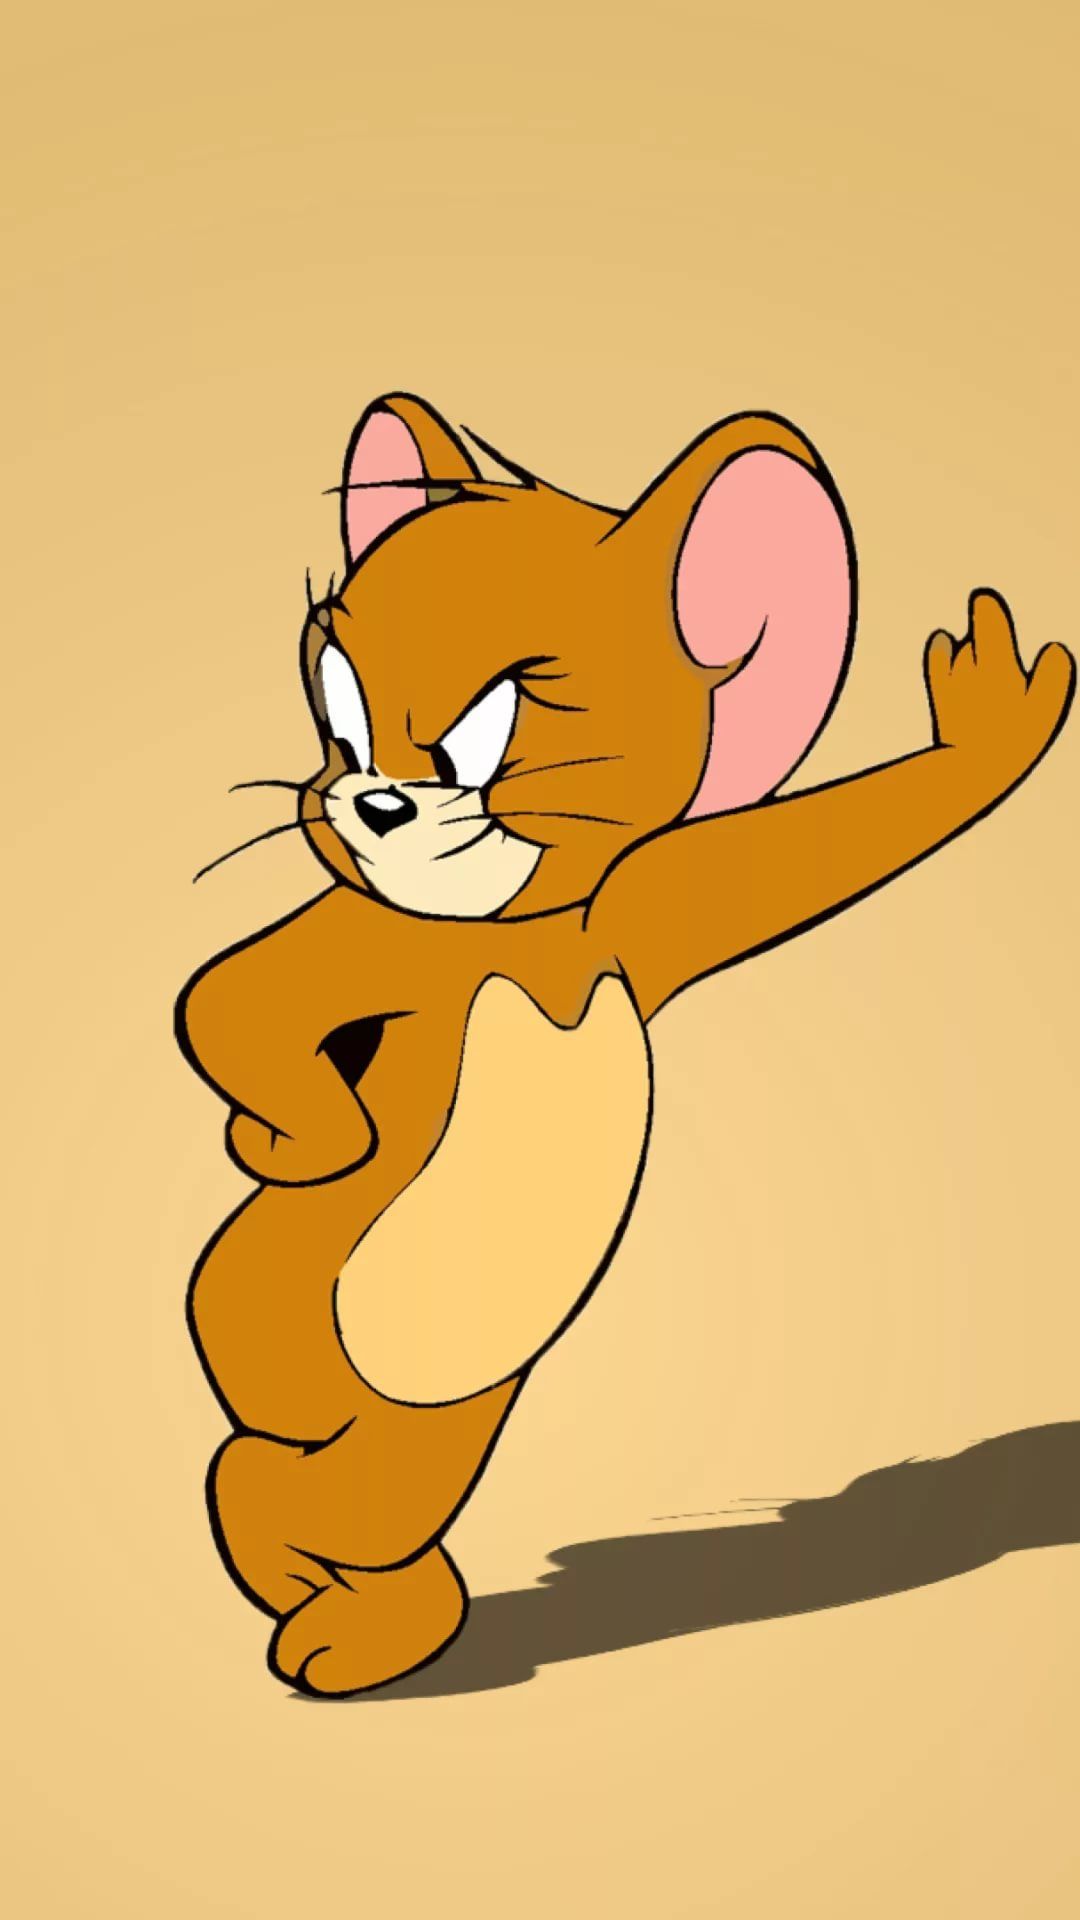 Tom And Jerry HD wallpaper for iPhone 6 1080p